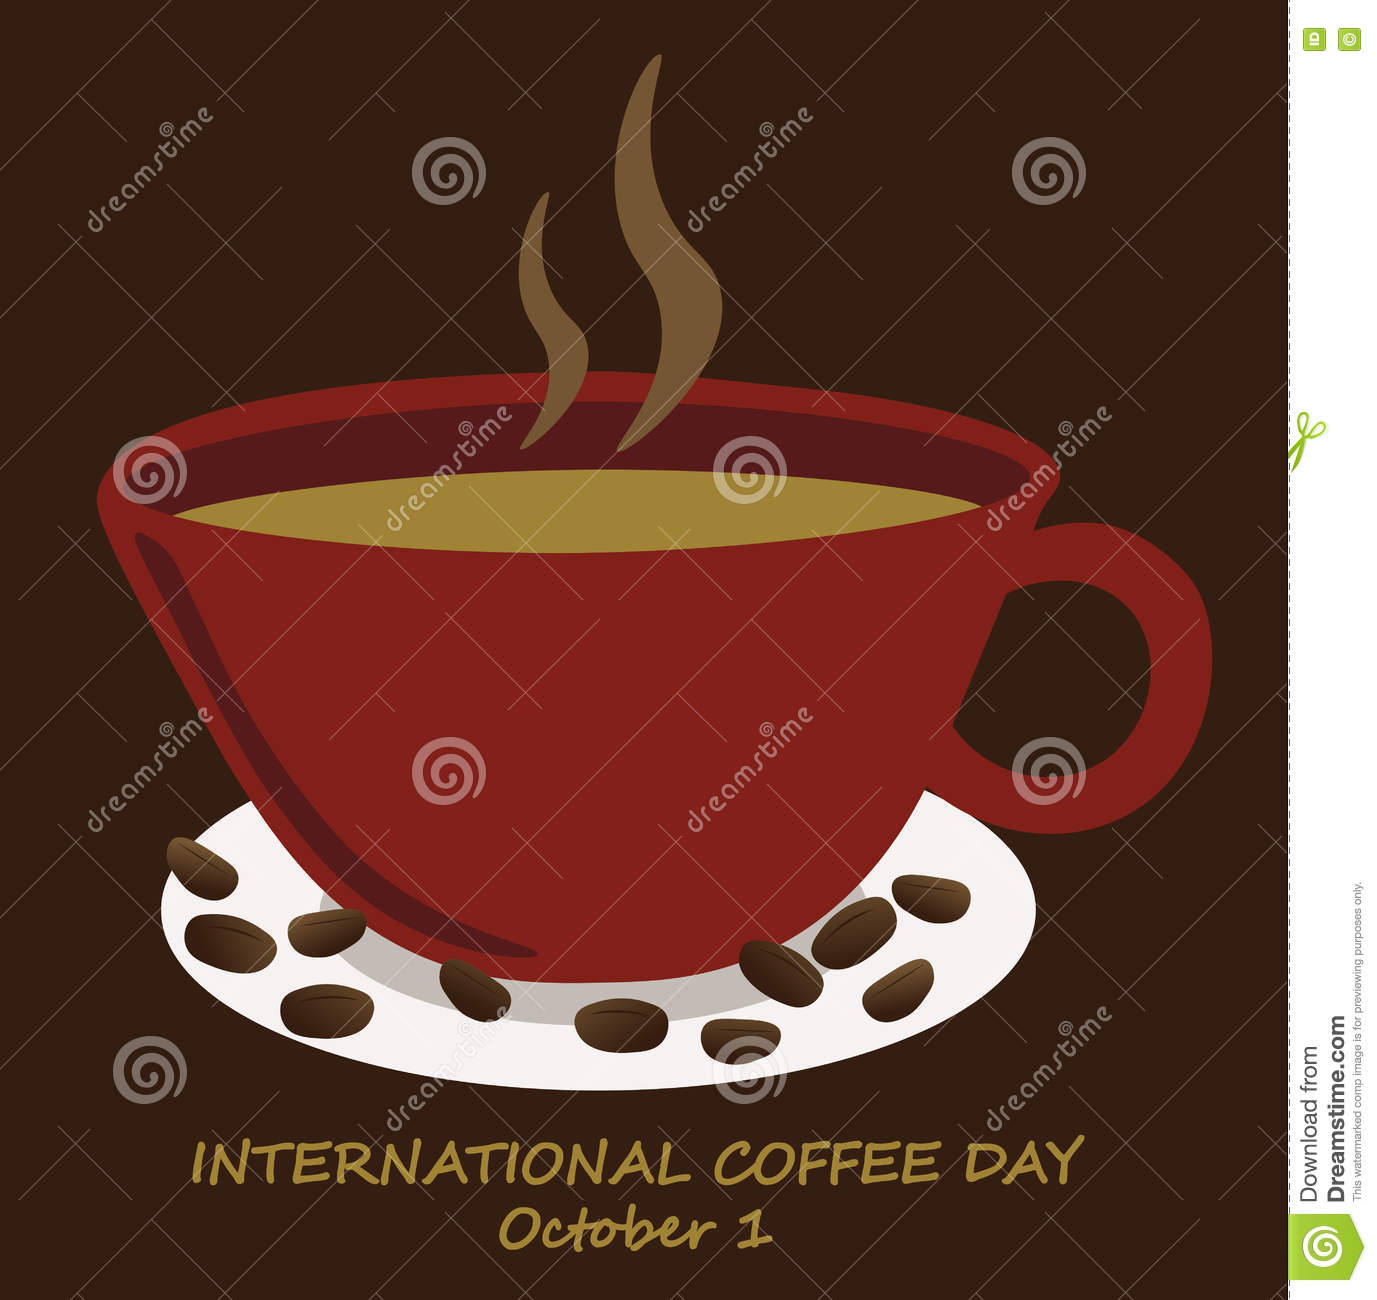 International Coffee Day October 1 Coffee Cup Illustration